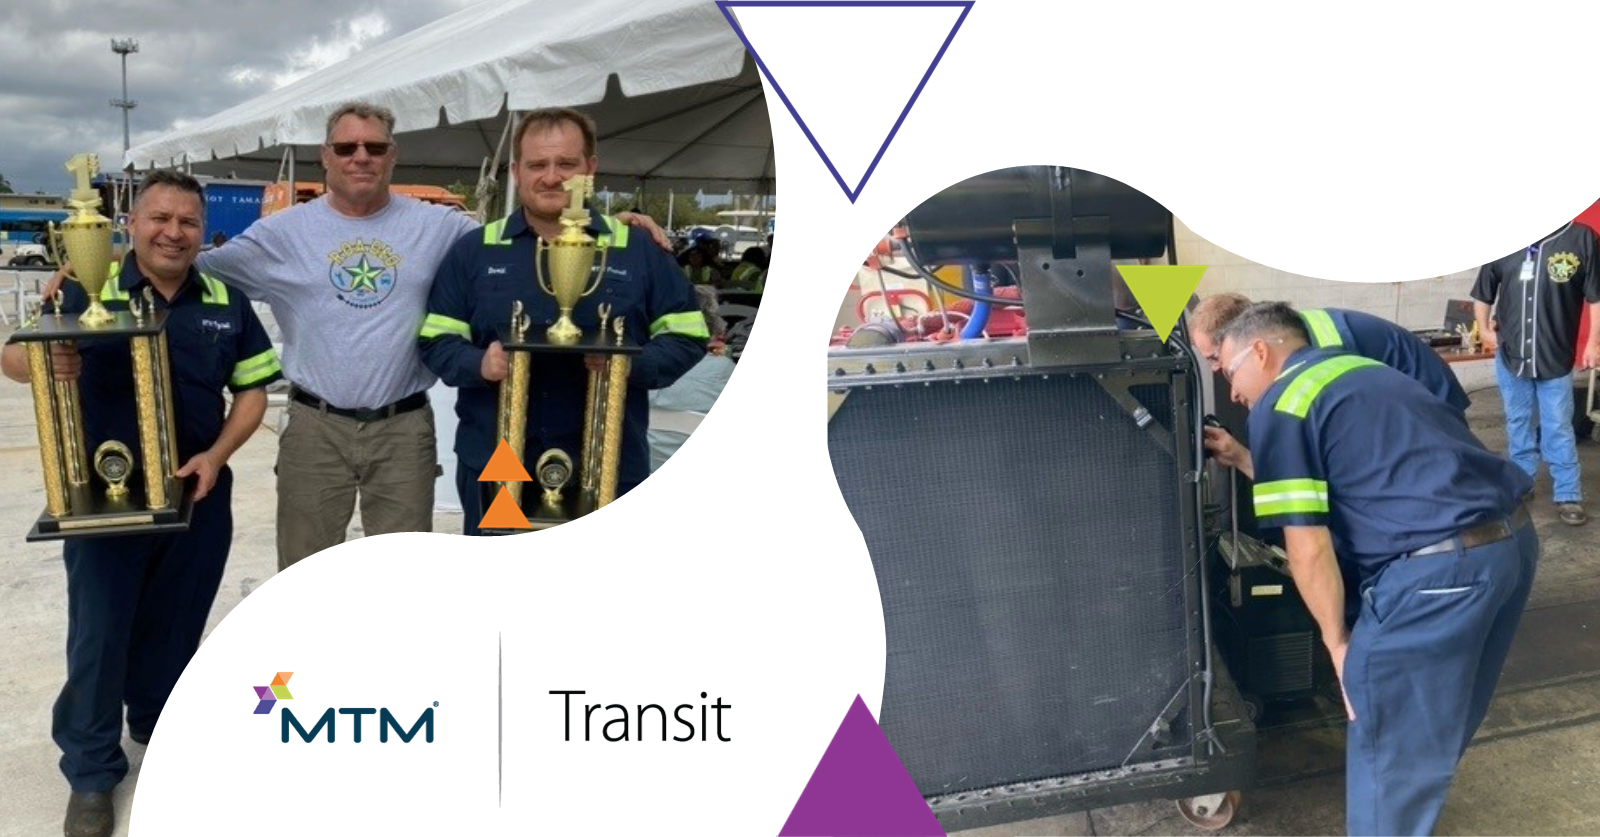 Claudio Gonzales and David Thompson, maintenance technicians from our Austin South base operation in Texas, recently clinched first place at a regional paratransit maintenance rodeo.